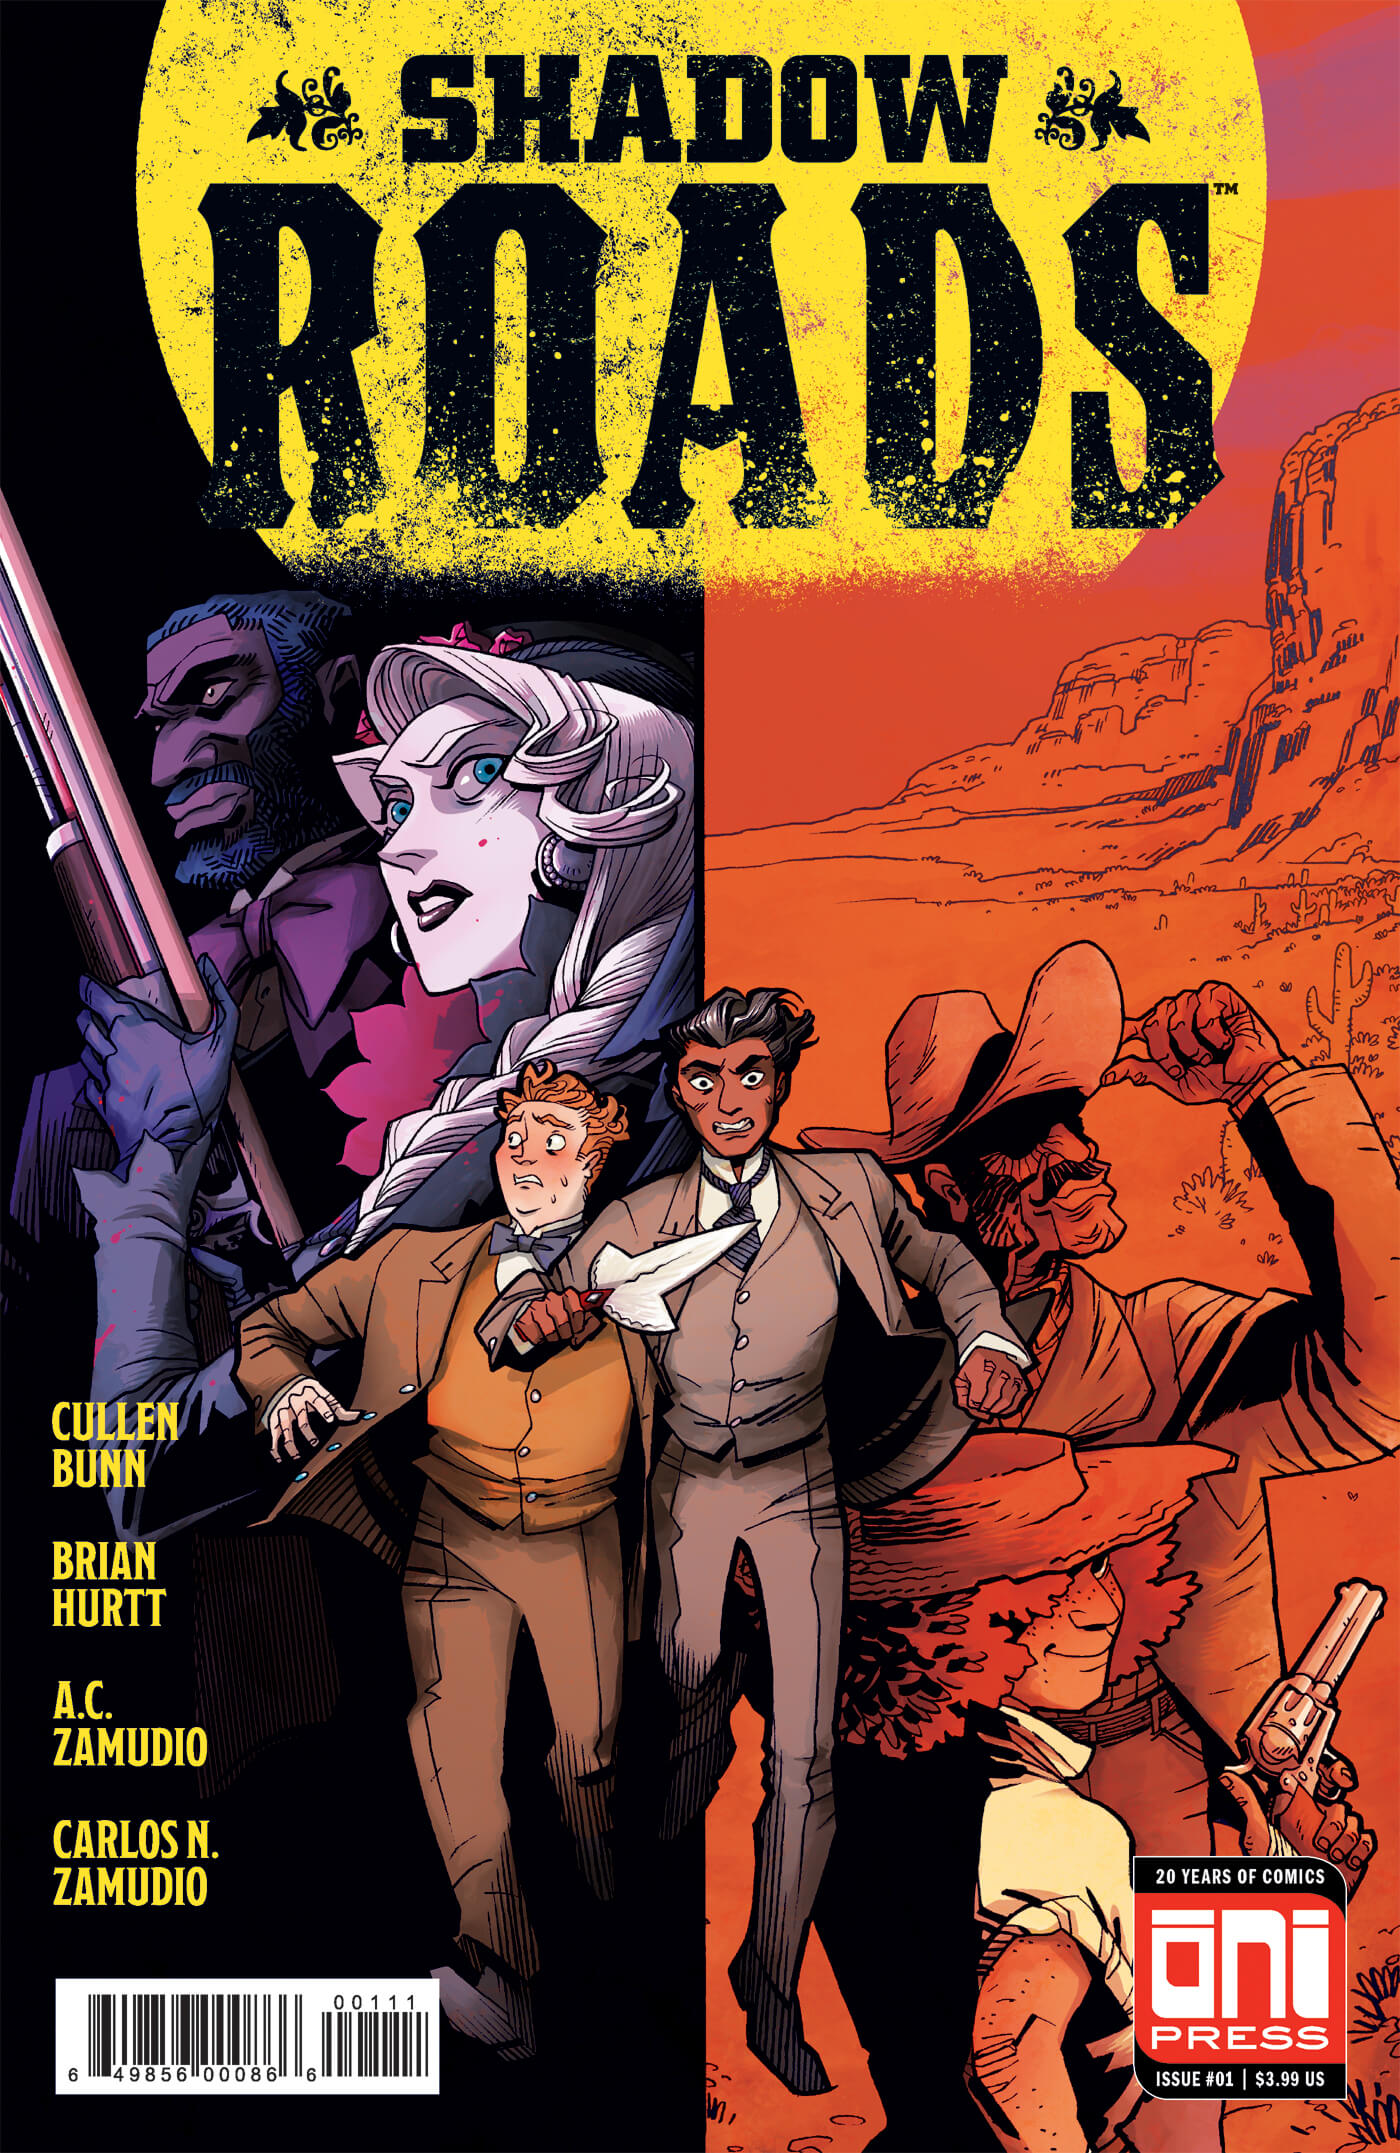 Shadow Roads #1 review: A solid, 19th century soaked debut